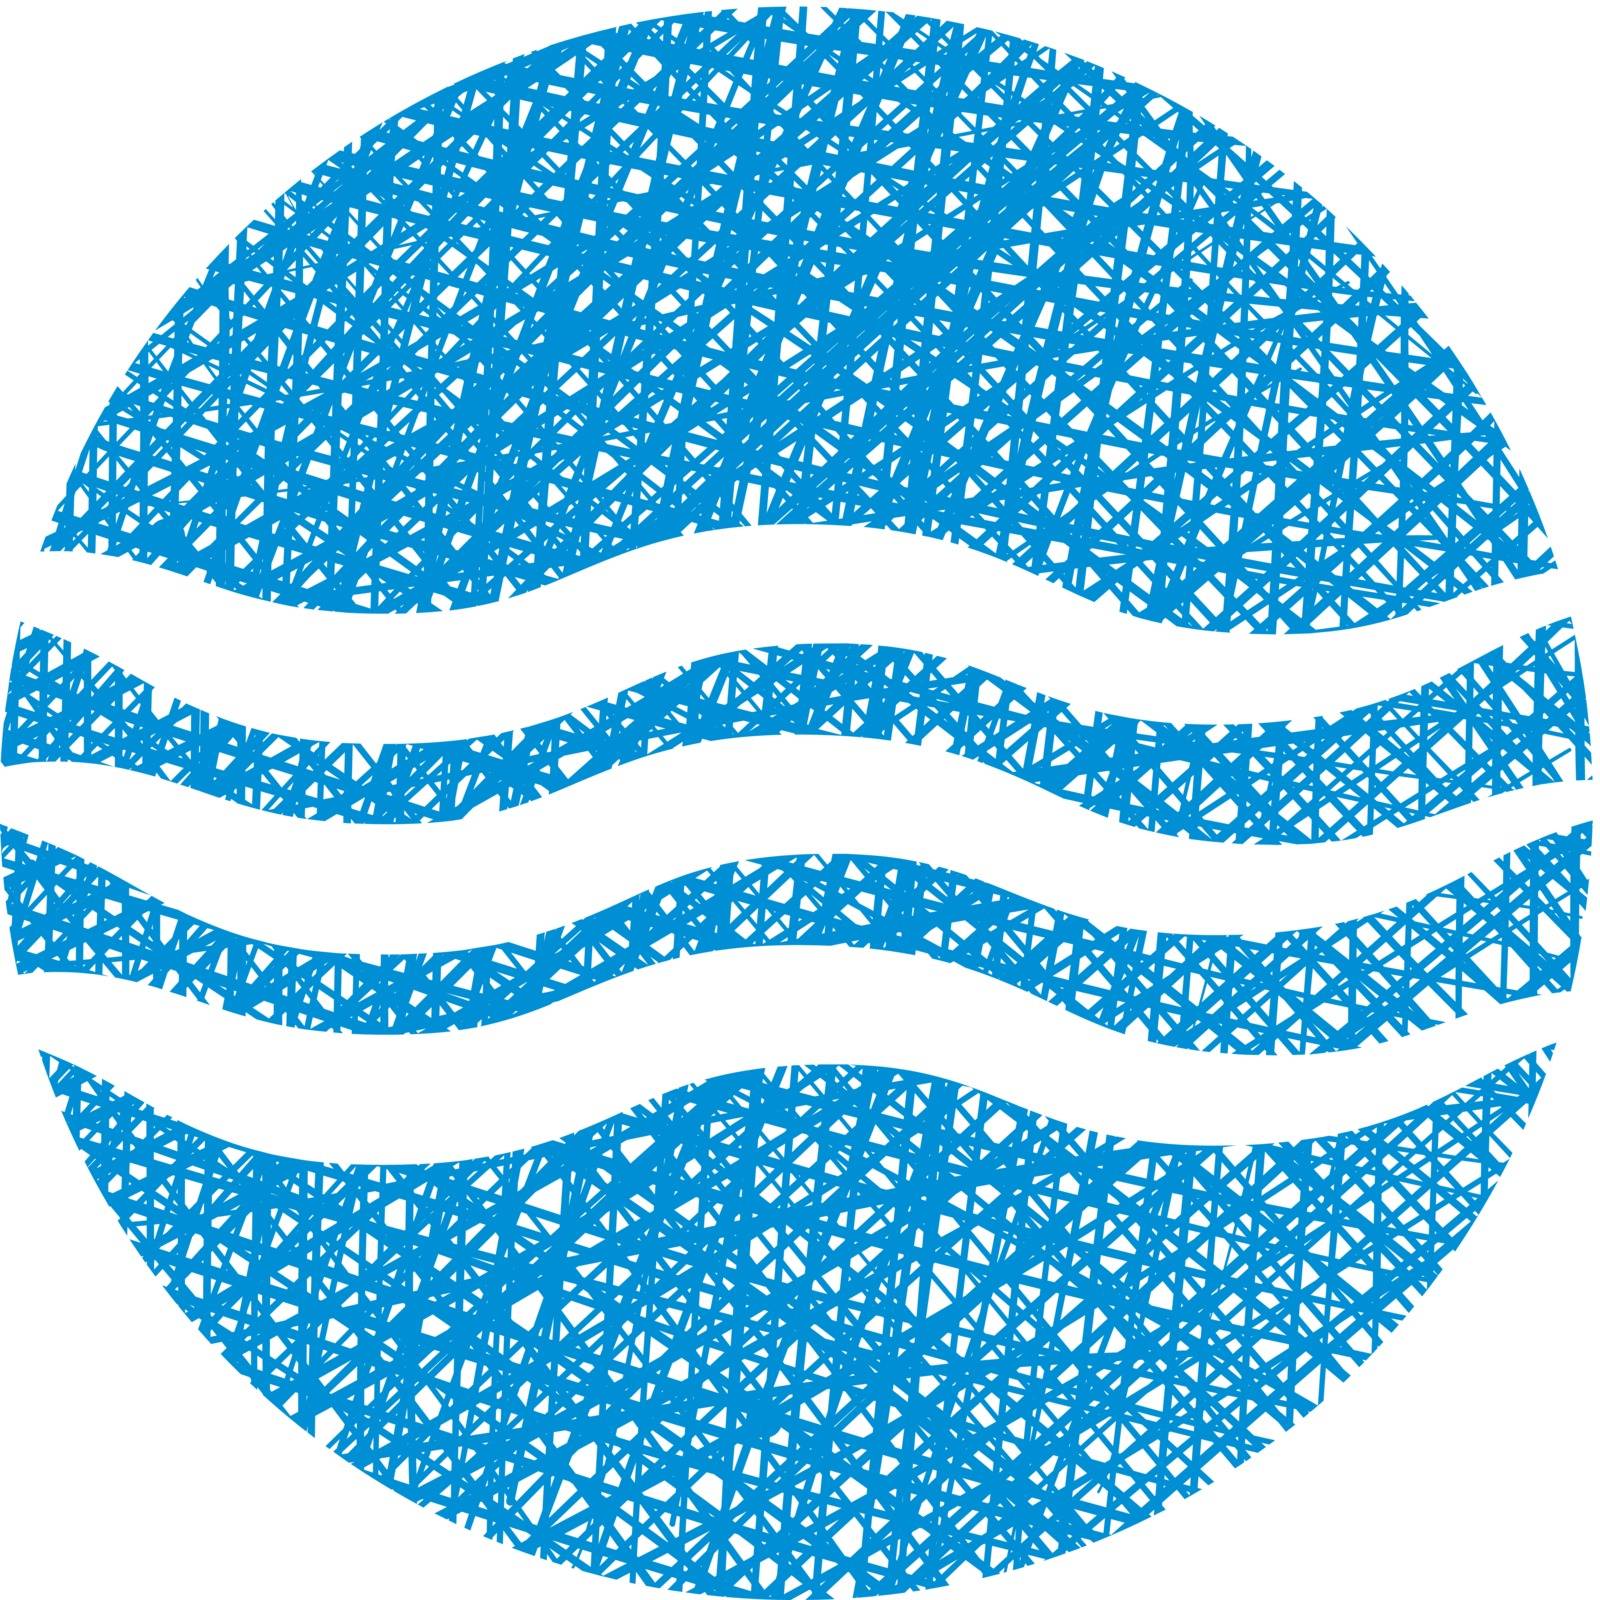 Wave water icon , abstract icon, vector symbol with hand drawn lines texture.